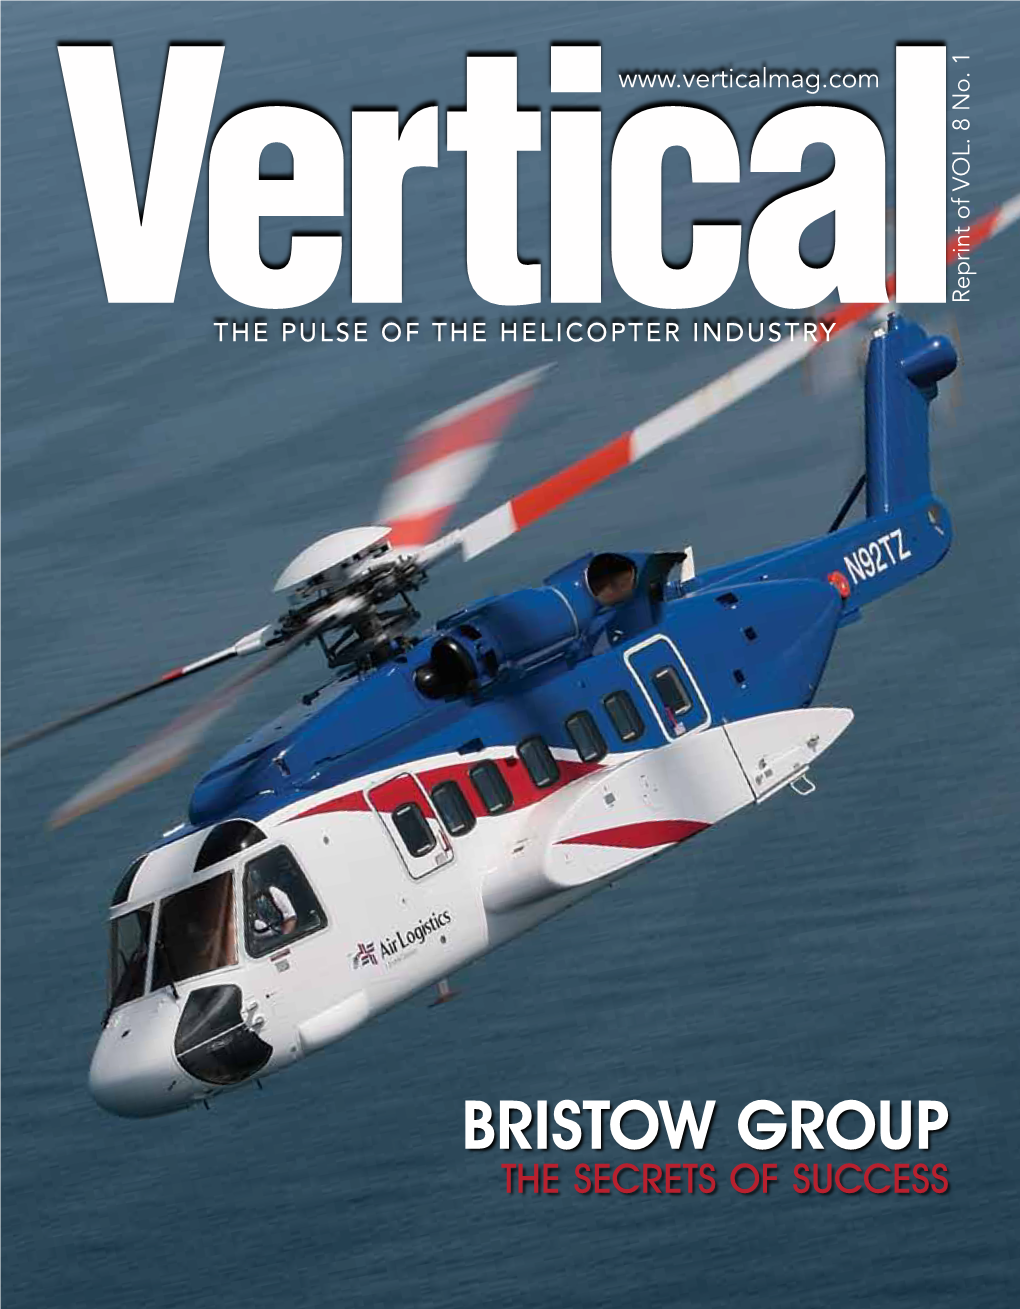 Bristow Group the Secrets of Success